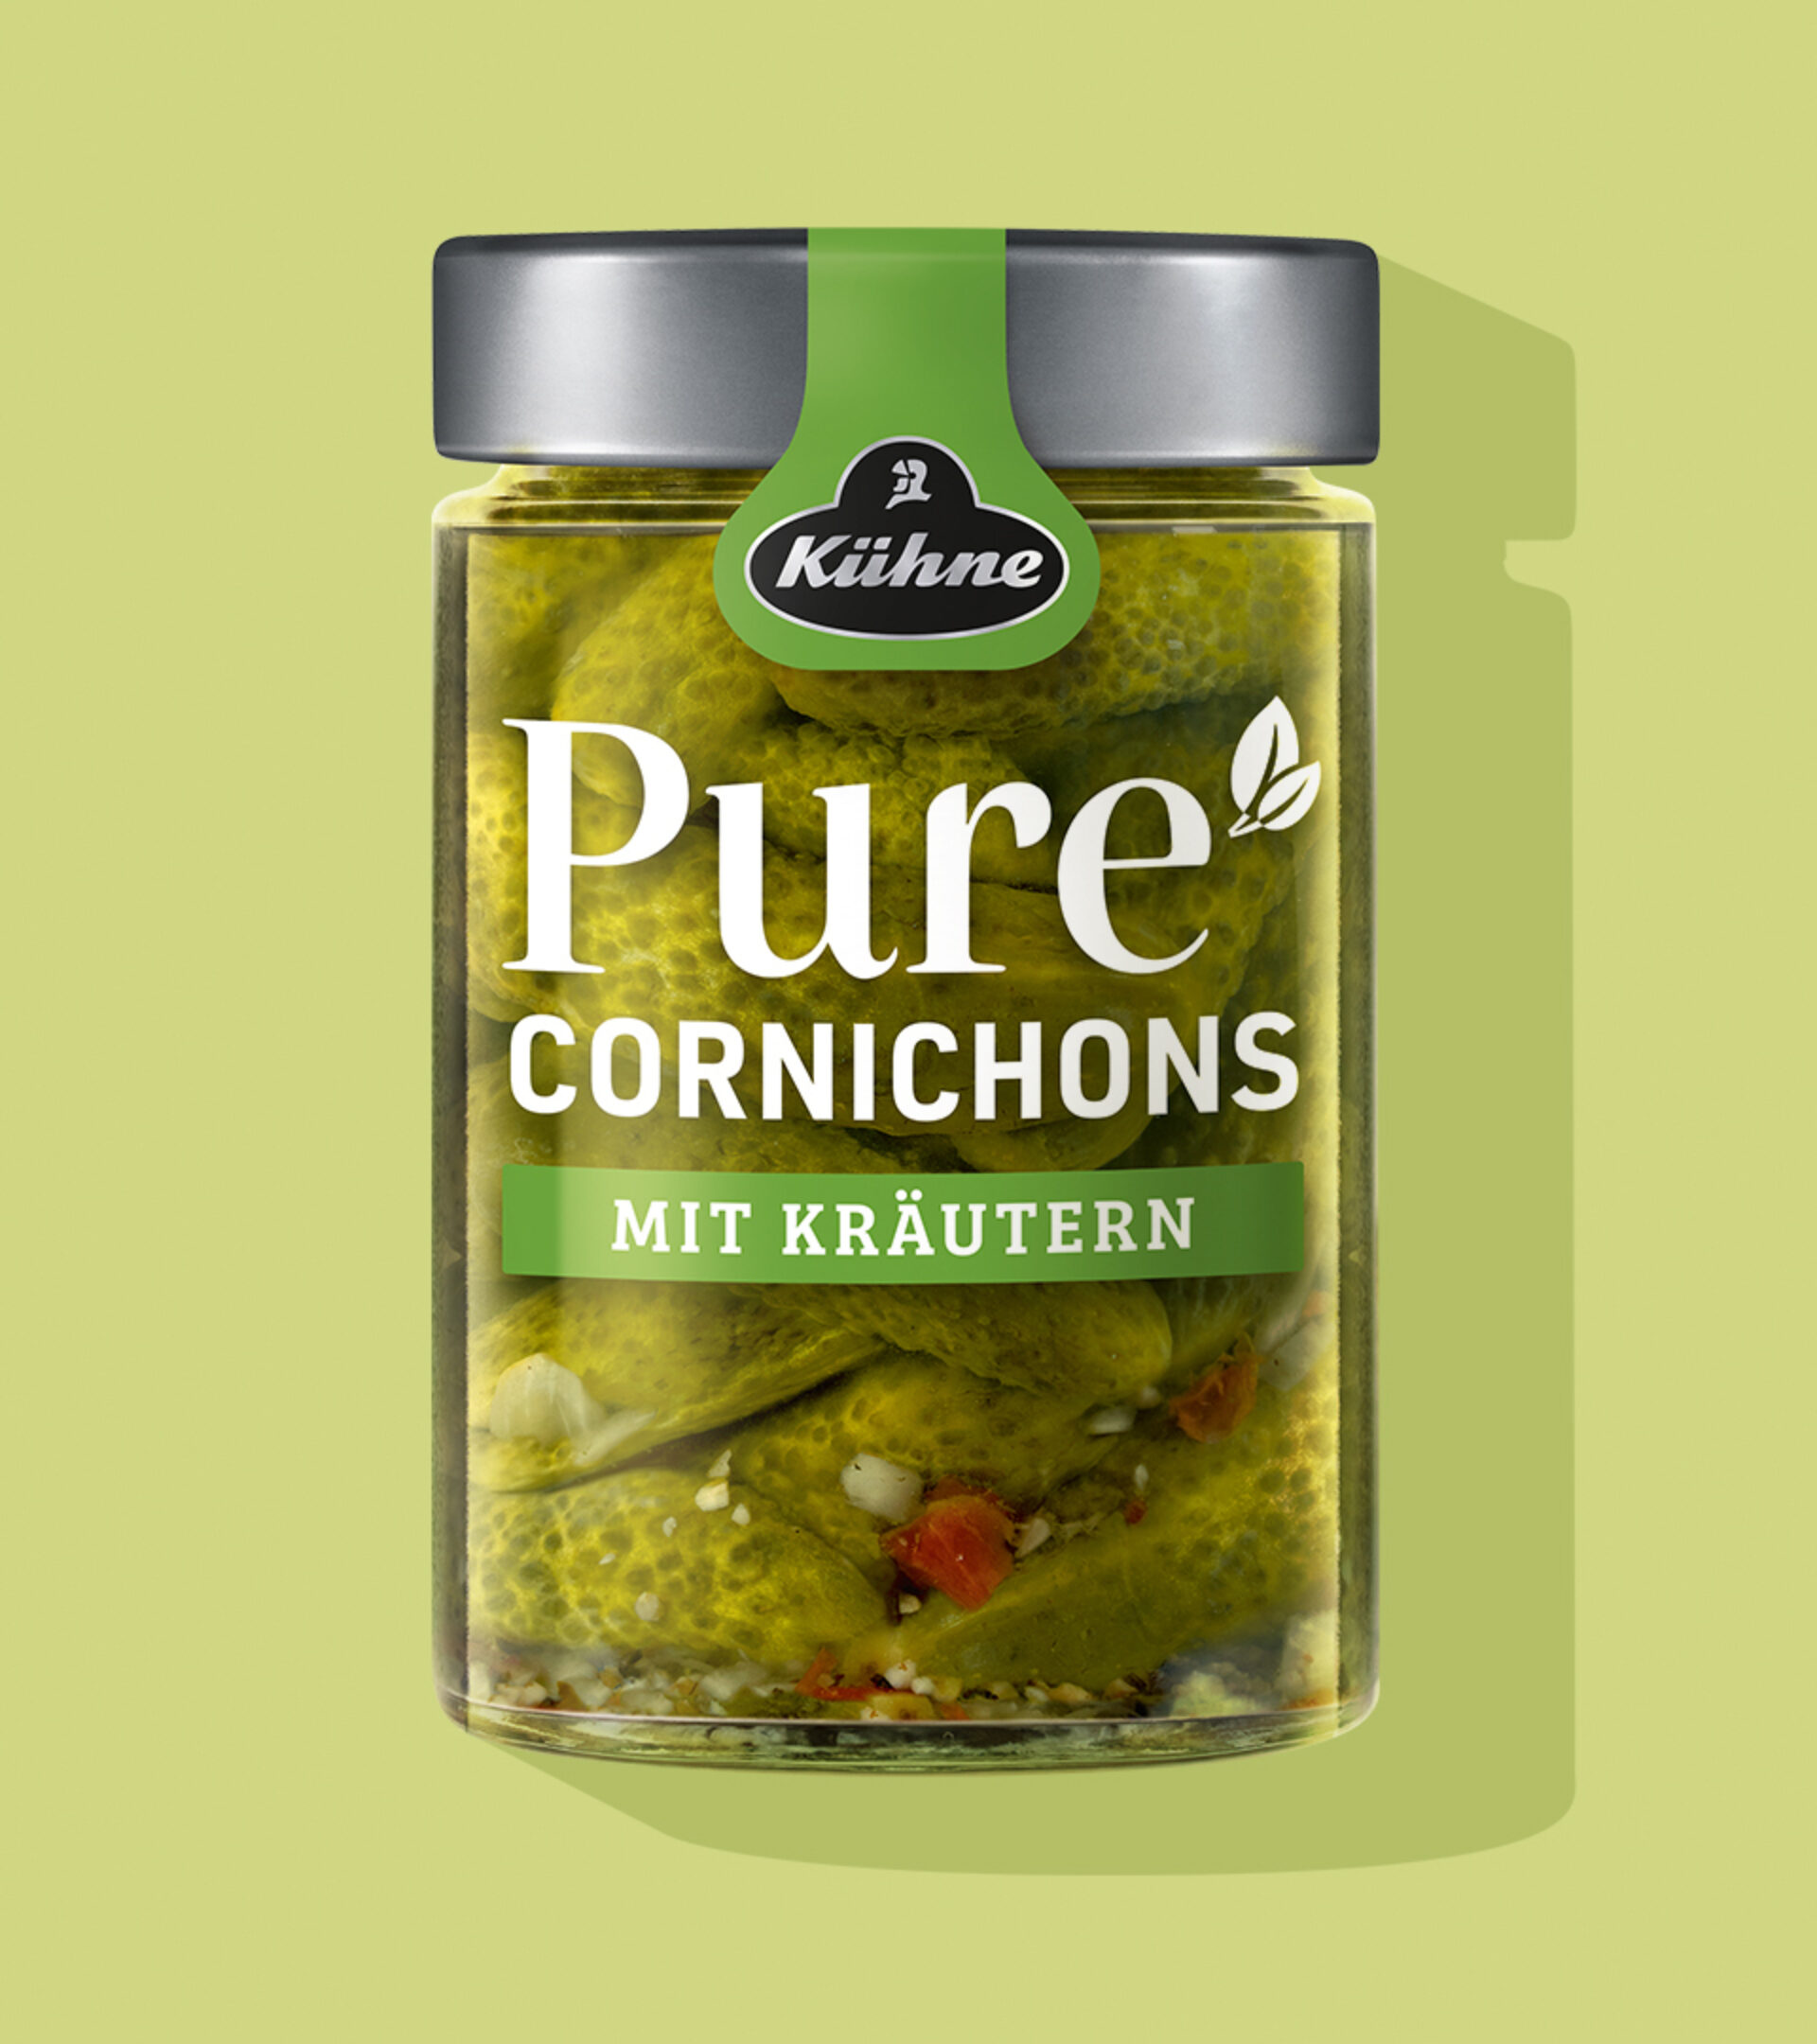 Kühne Pure Cornichons with herbs